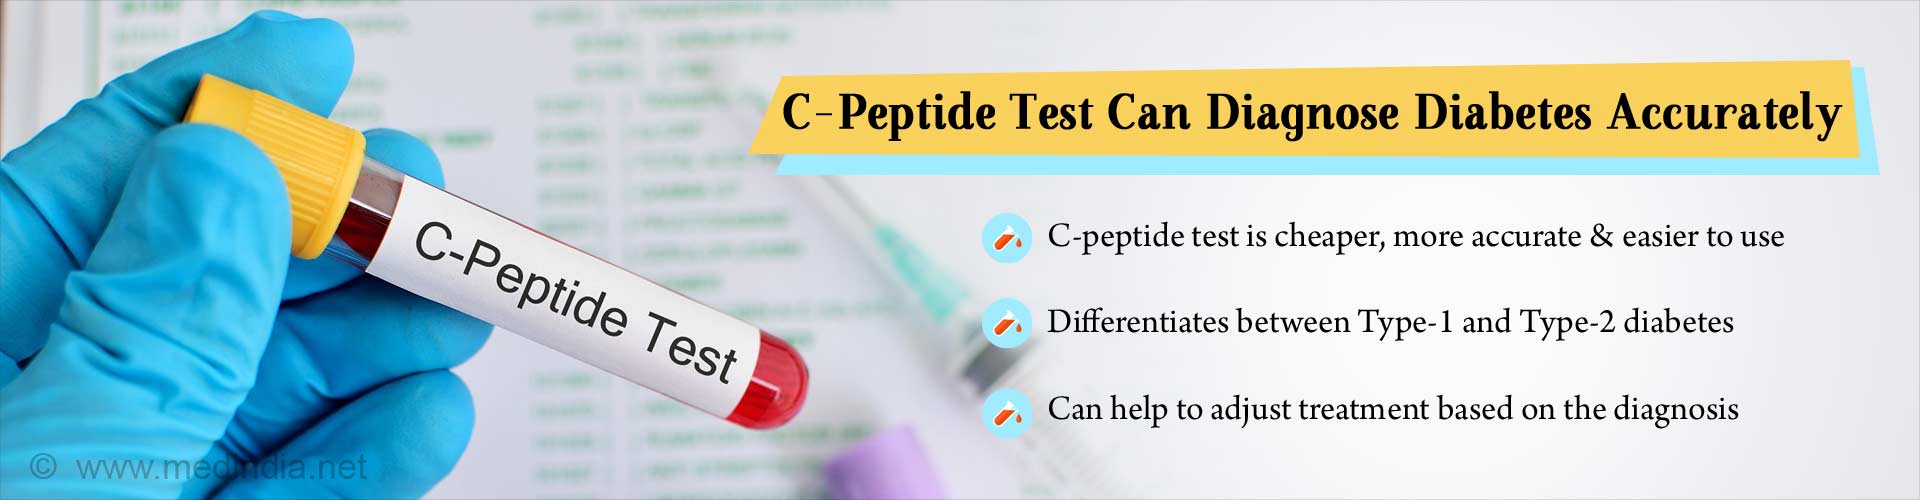 C-peptide test can diagnose diabetes accurately. C-peptide test is cheaper, more accurate and easier to use. Differentiates between Type-1 and Type-2 diabetes. Can help to adjust treatment based on the diagnosis.